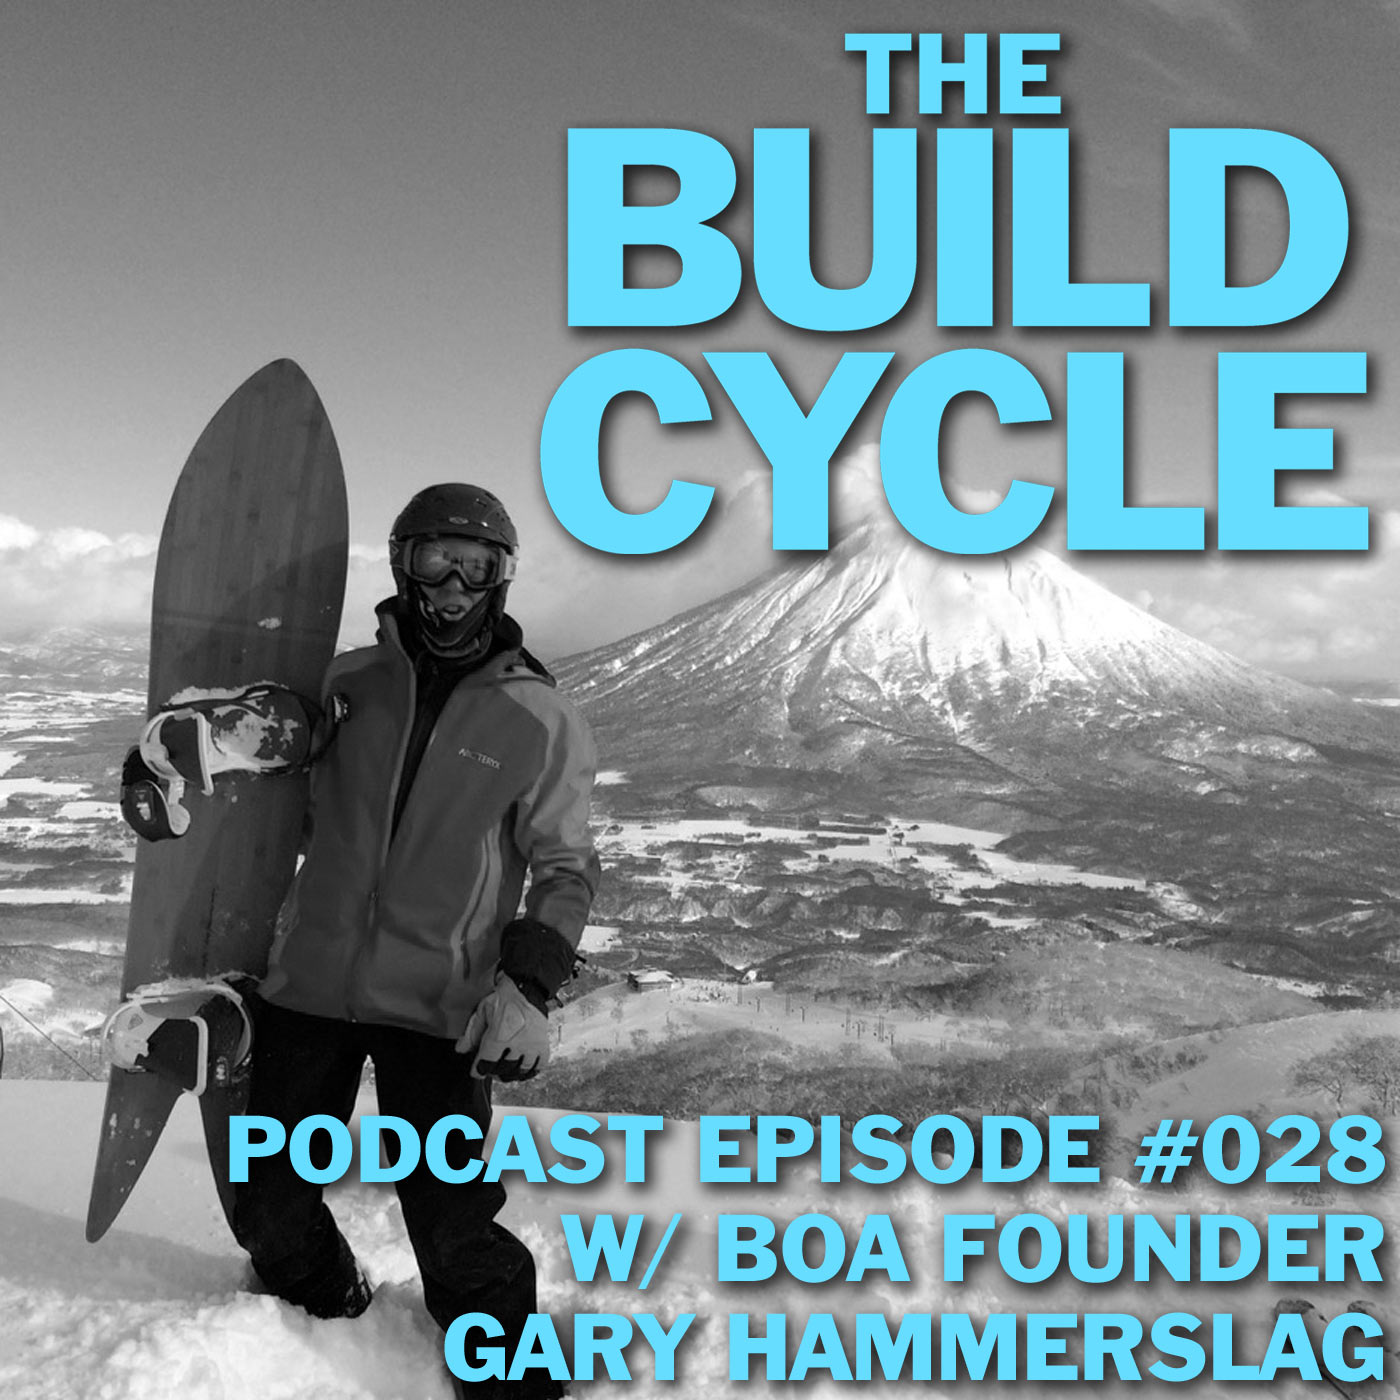 Ep #028 - How to Outpace the Competition w/ BOA founder Gary Hammerslag